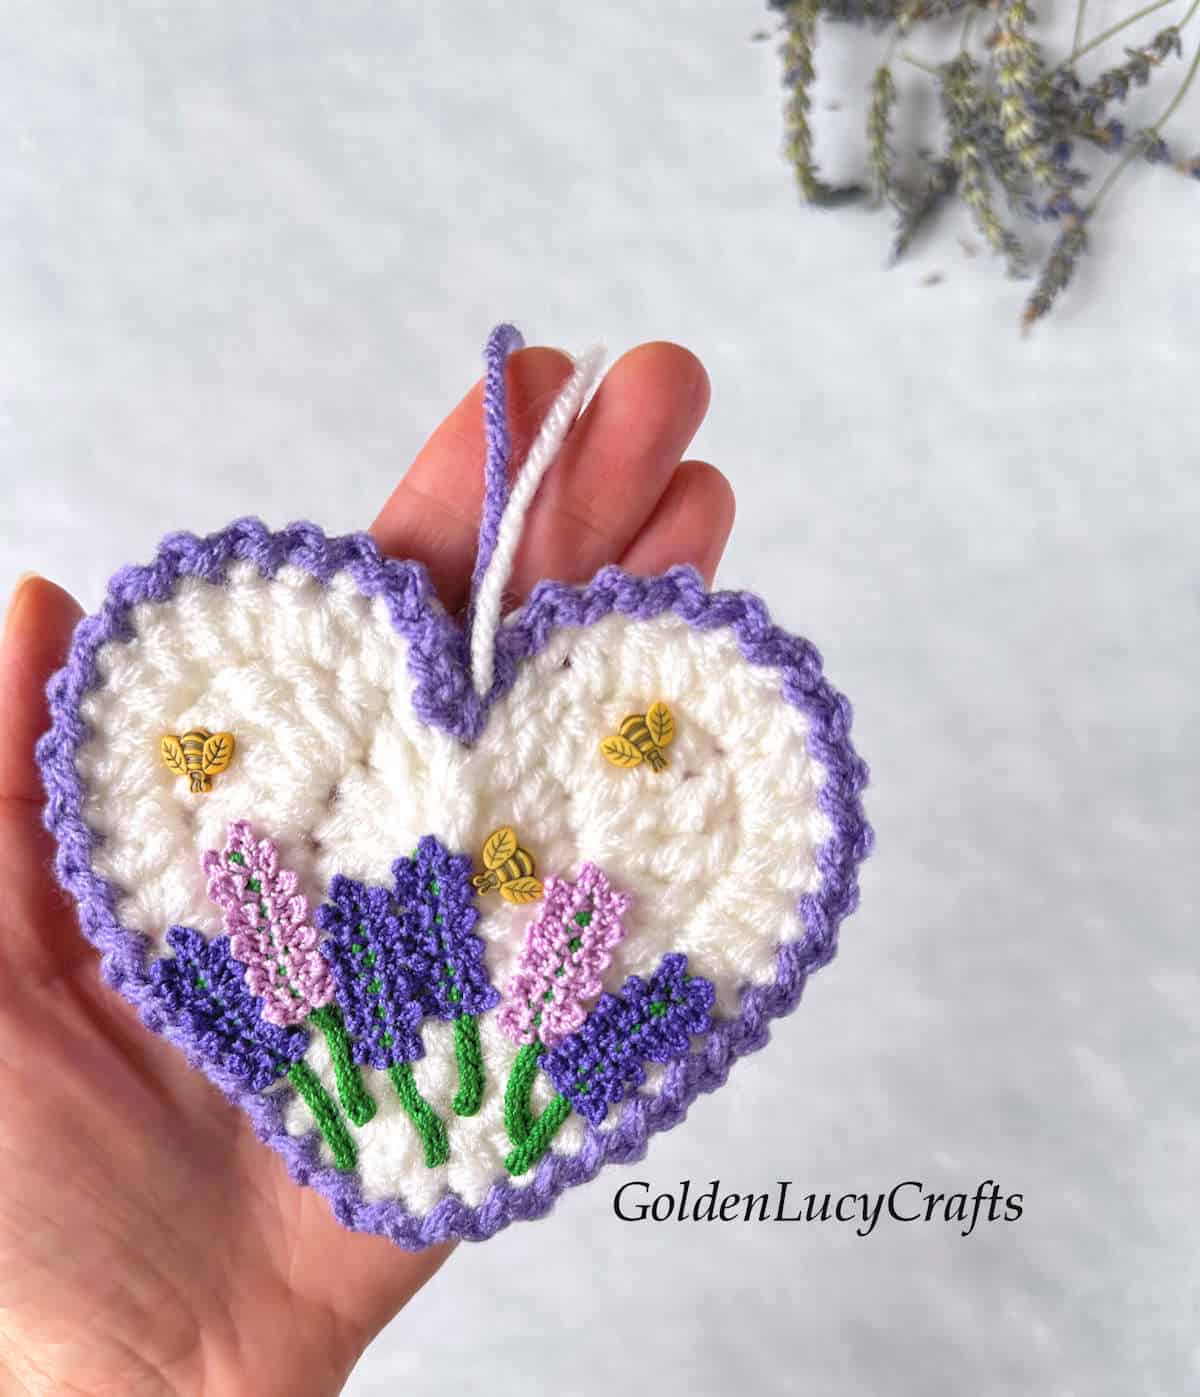 Crochet lavender heart in the palm of a hand.